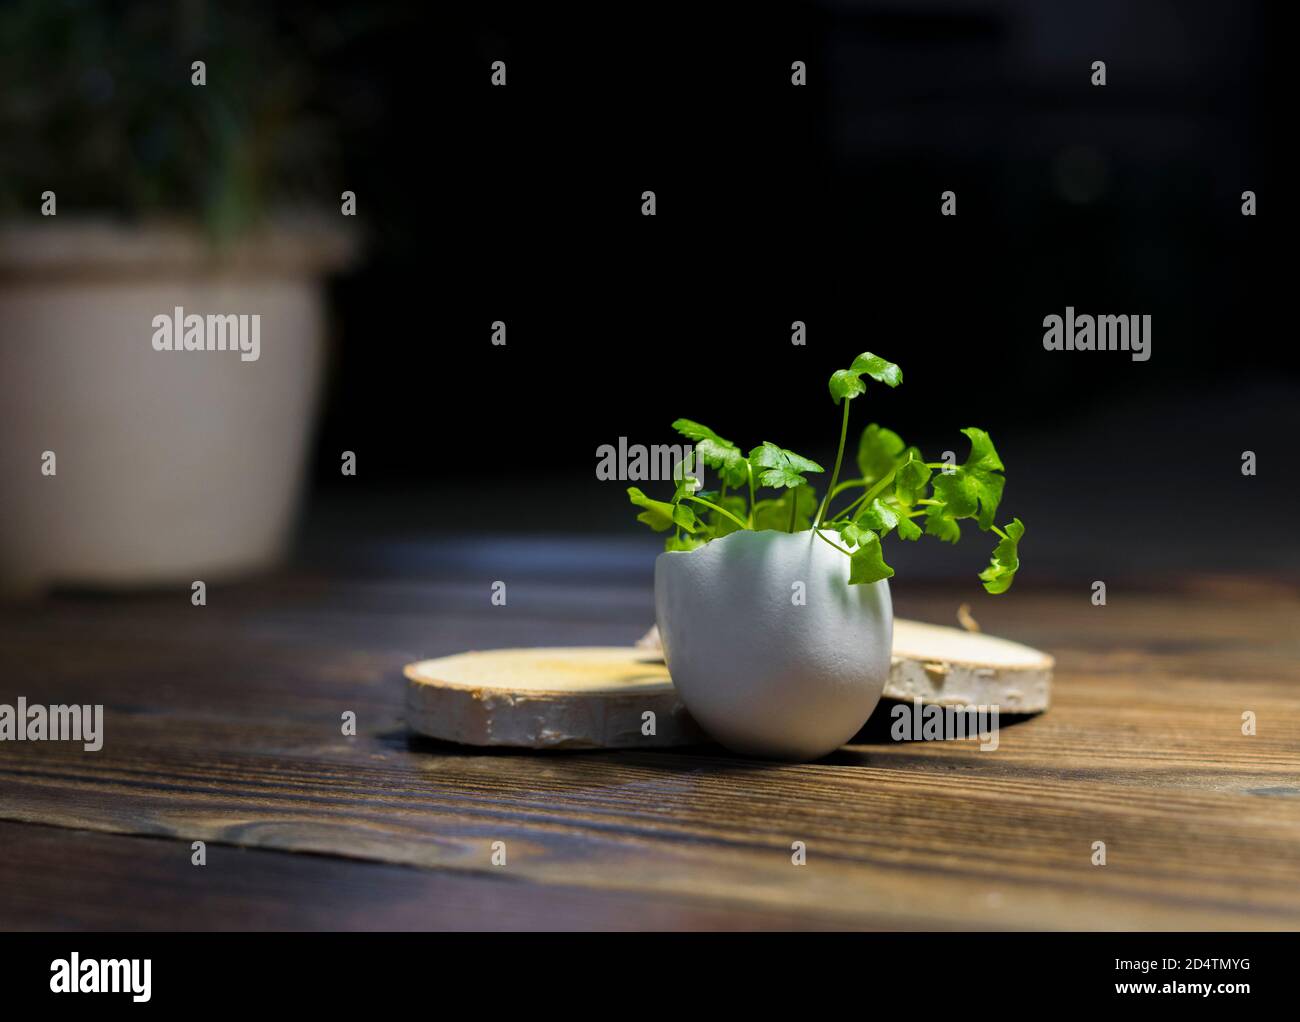 Seedlings of celery growing out of a white eggshell filled with soil in dramatic lighting on a old grunge wood surface. Shallow depth of field. Stock Photo